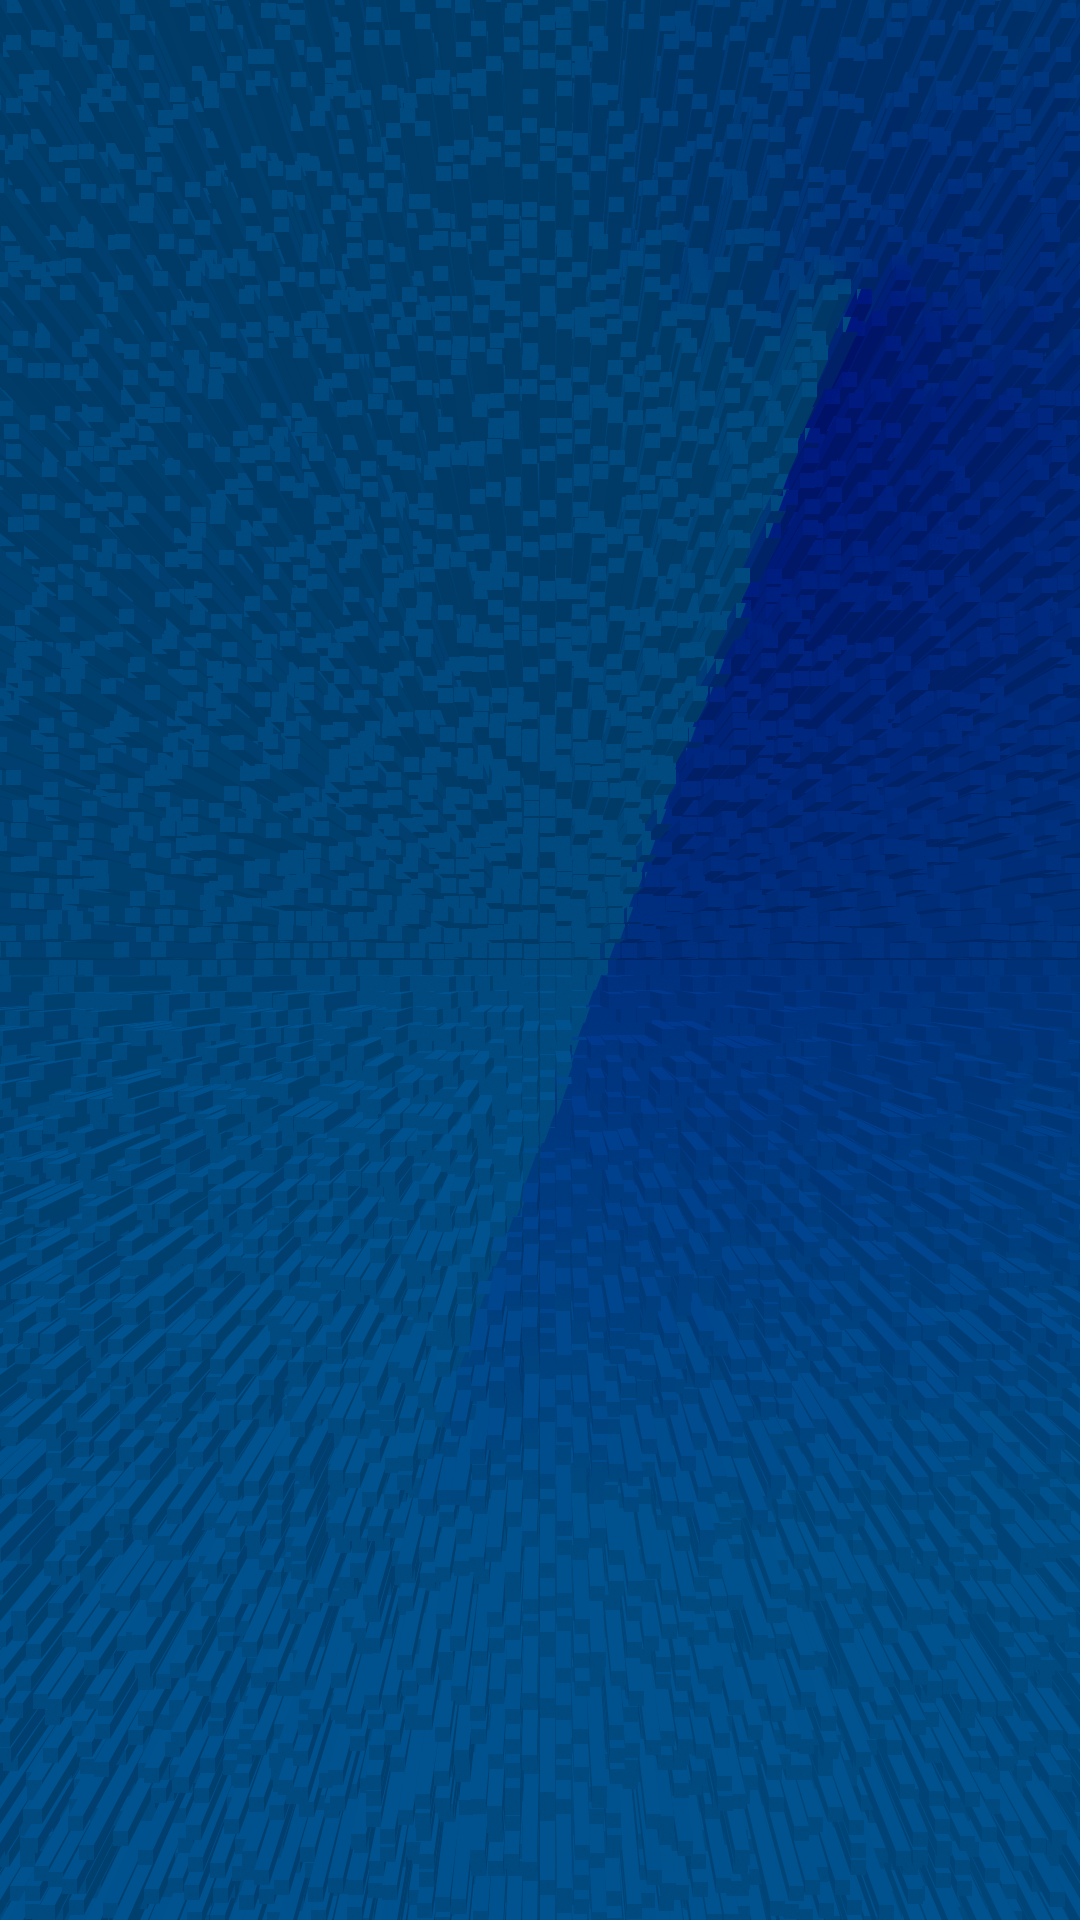 Extruded Wallpaper Mobile.png